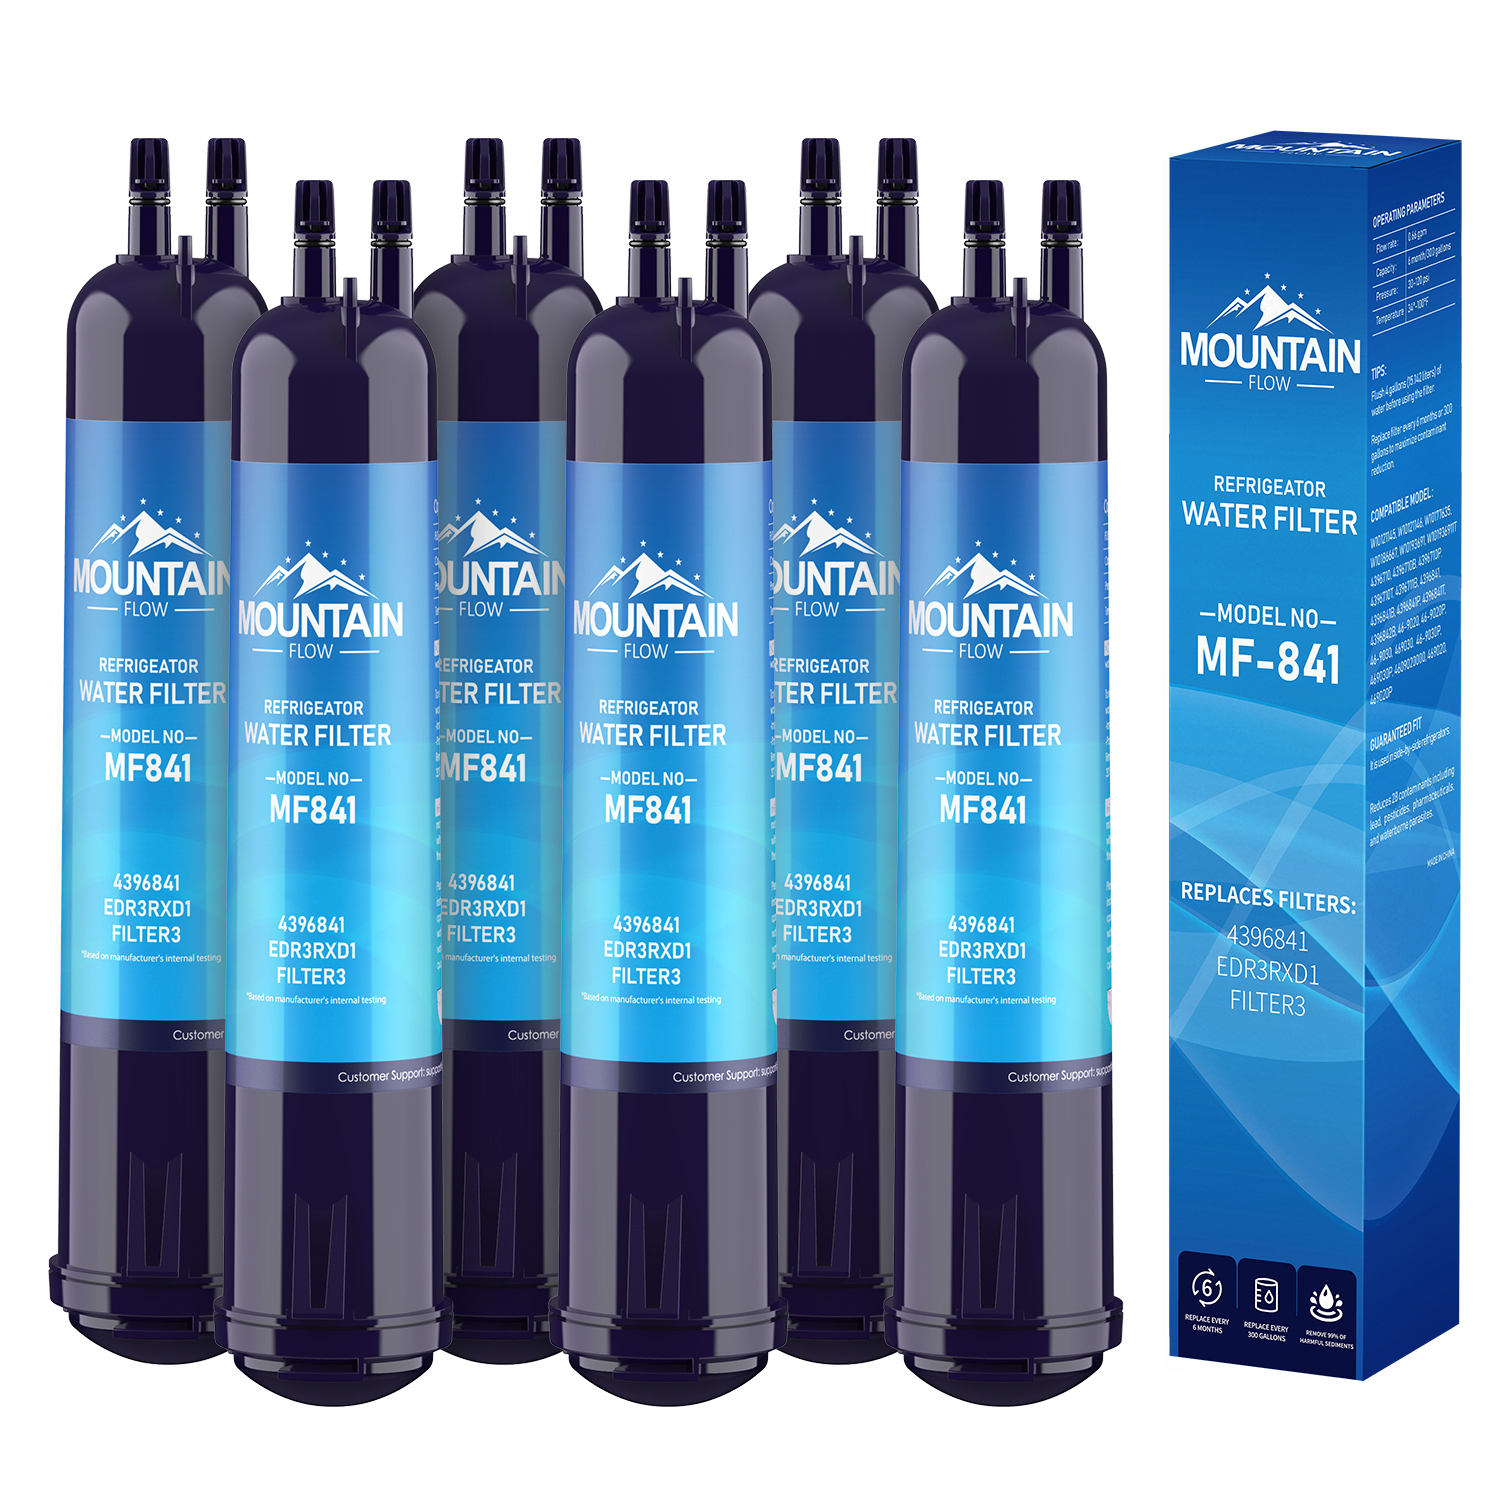 EDR3RXD1, 4396841 Refrigerator Filter 3 Compatible T2RFWG2, 9030, 9083 Water Filter, by MountainFlow, 6Packs